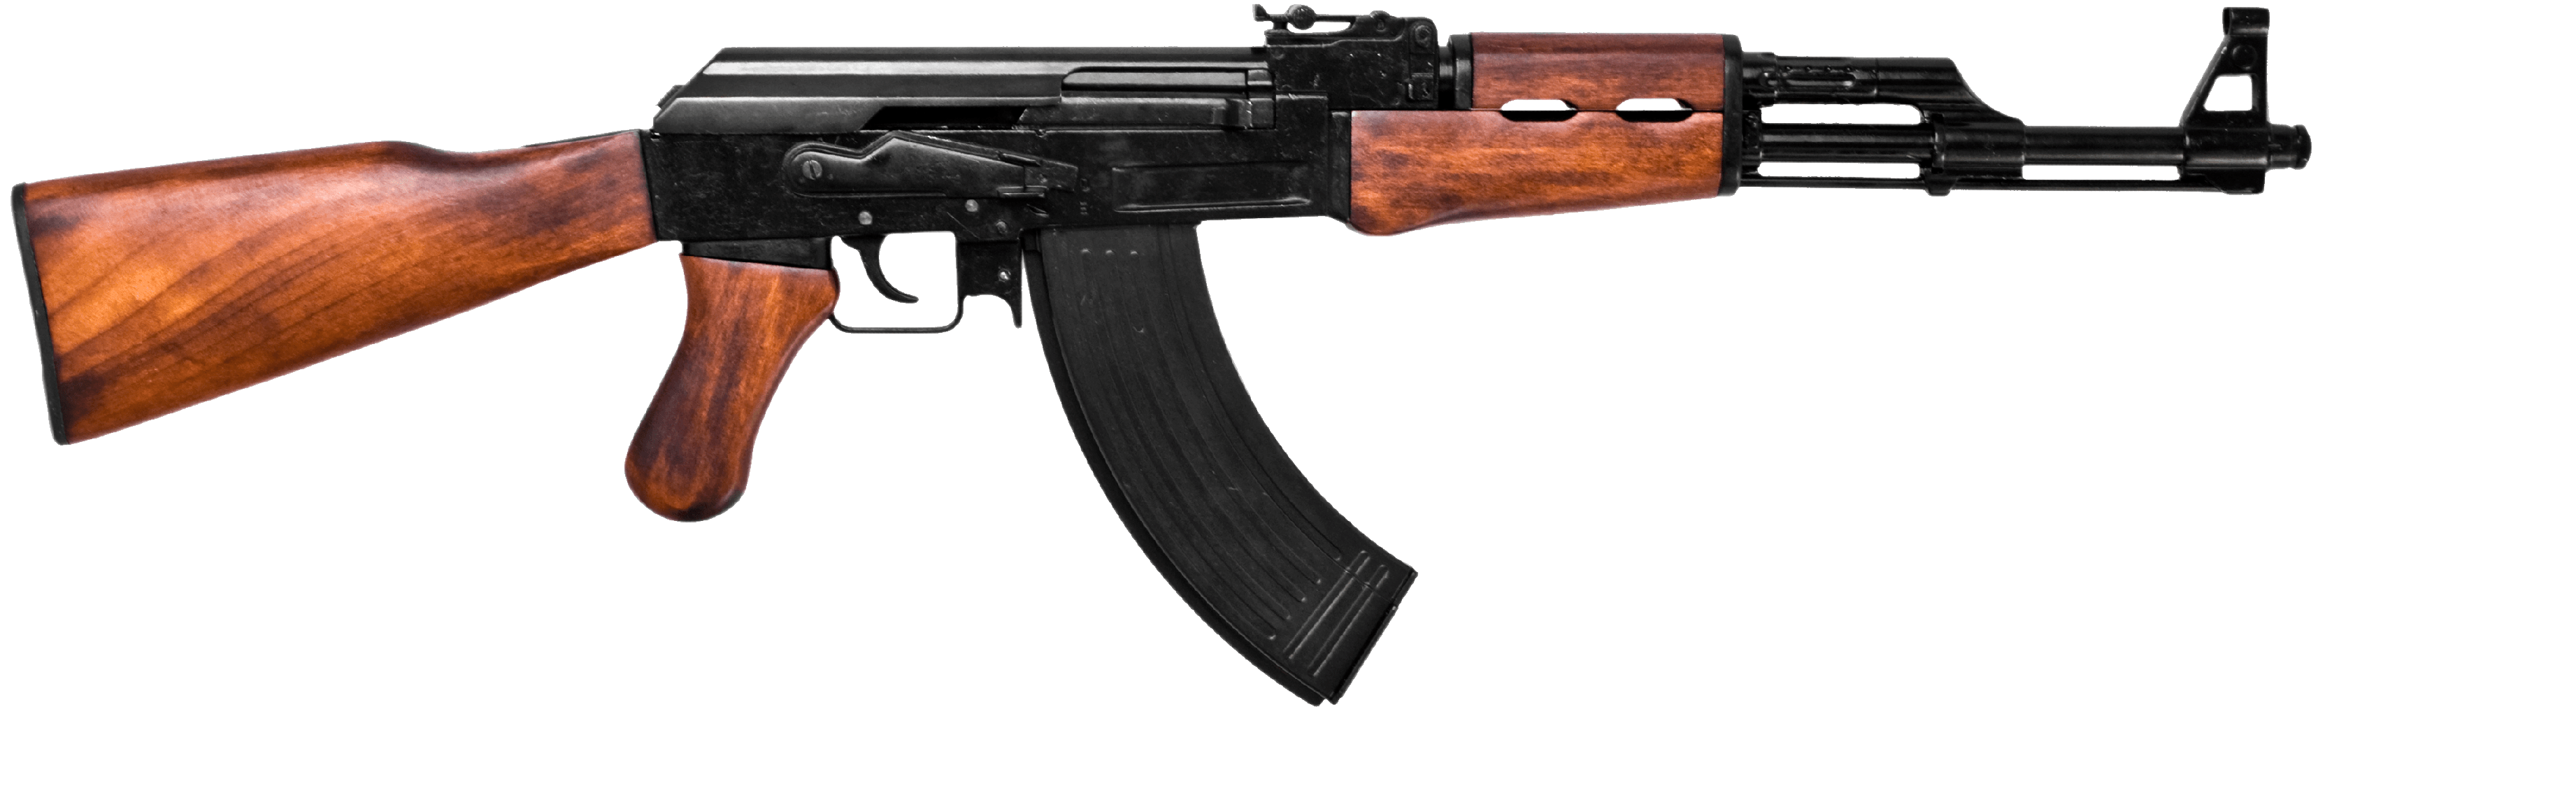 Weapon PNG Free Download